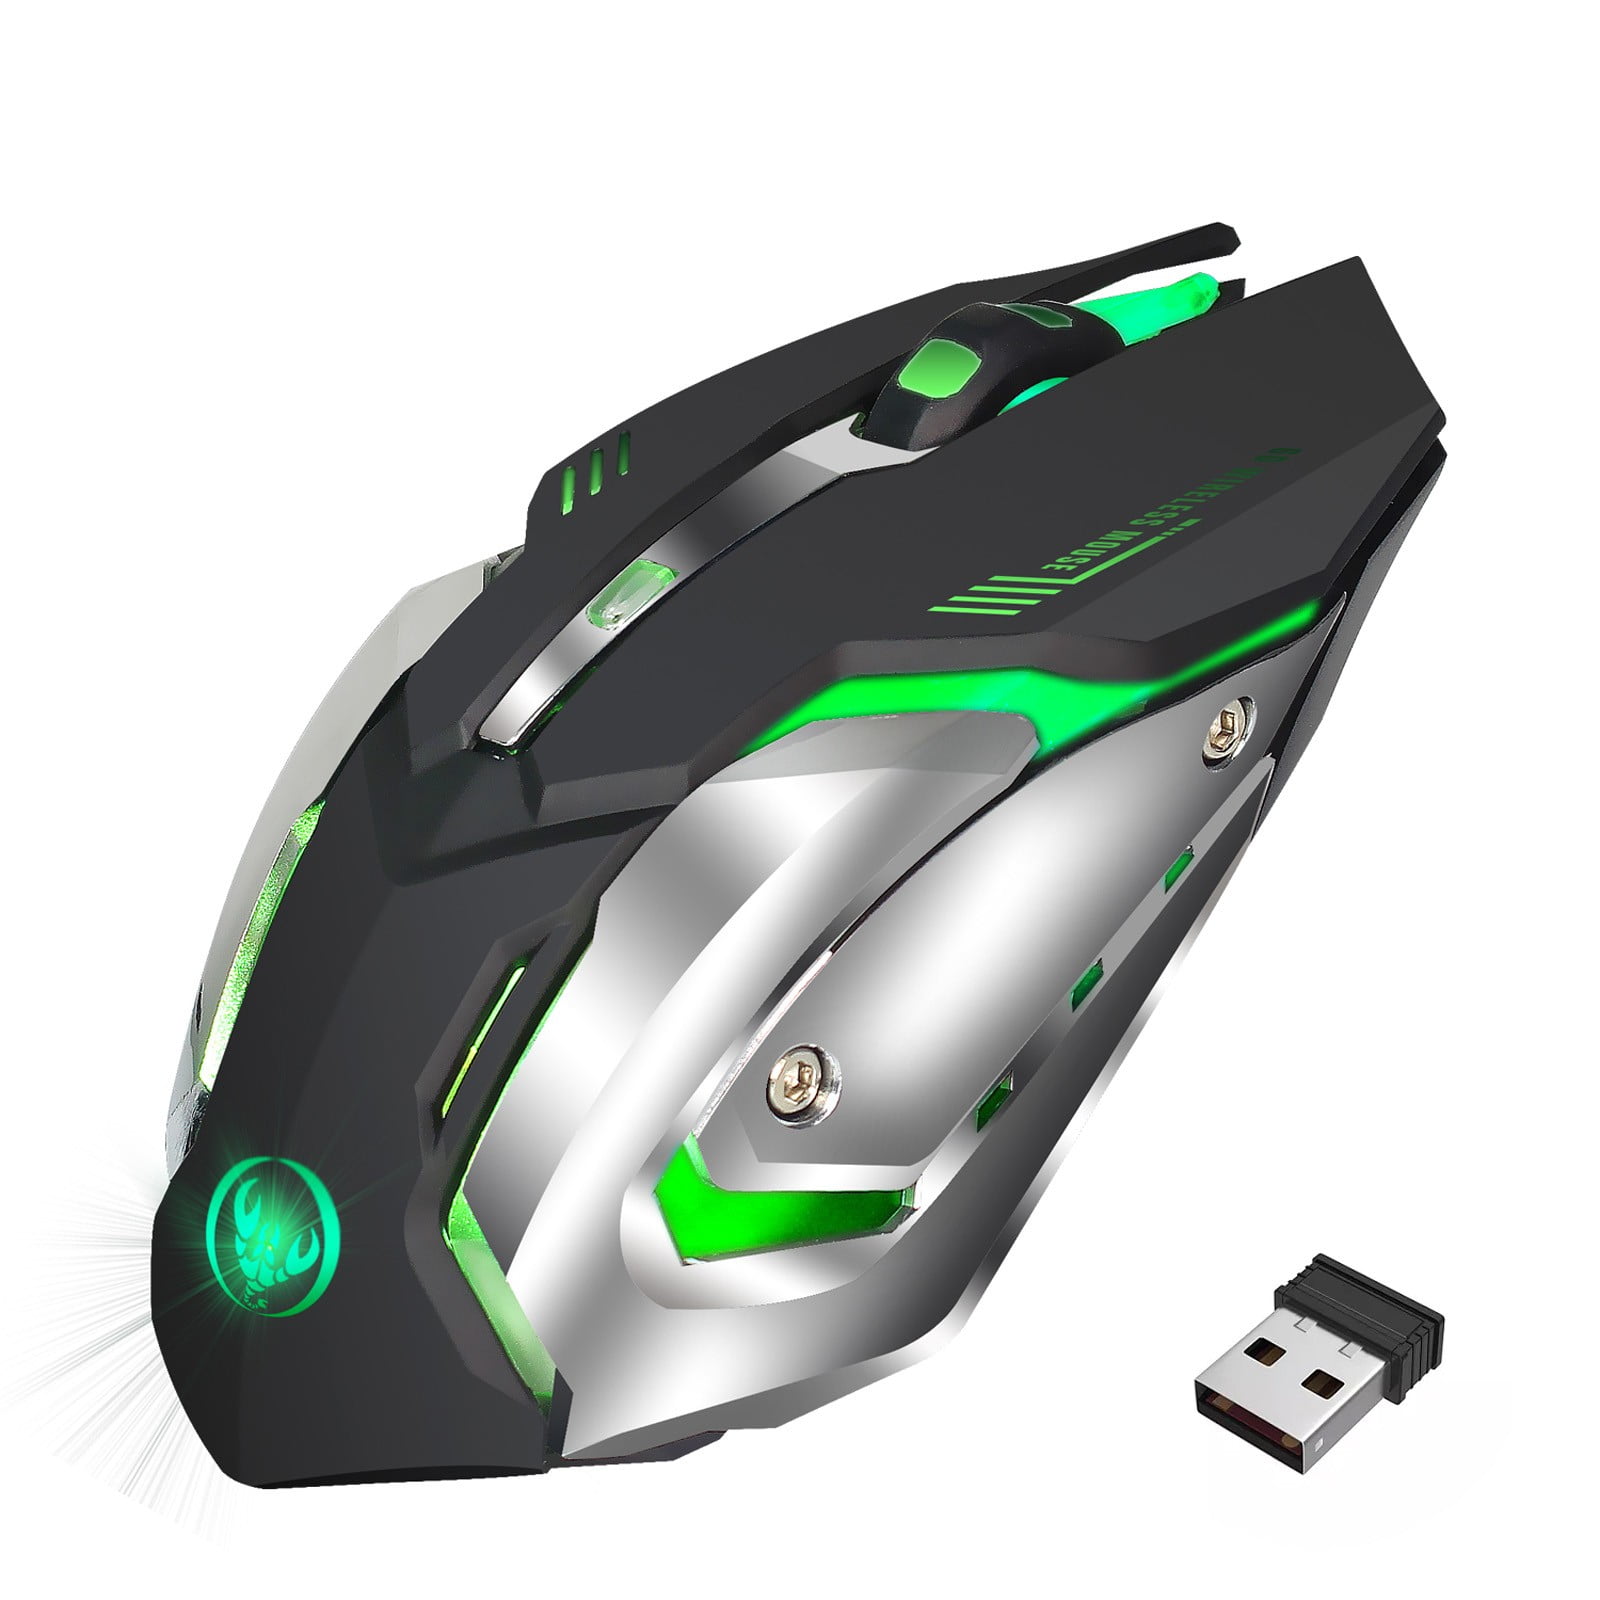 PC 2.4G Wireless Gaming Mouse Ergonomic Optical Mouse with Colorful Light Rechargeable for Laptop 2400 DPI 6 Buttons Notebook Mac-M10 